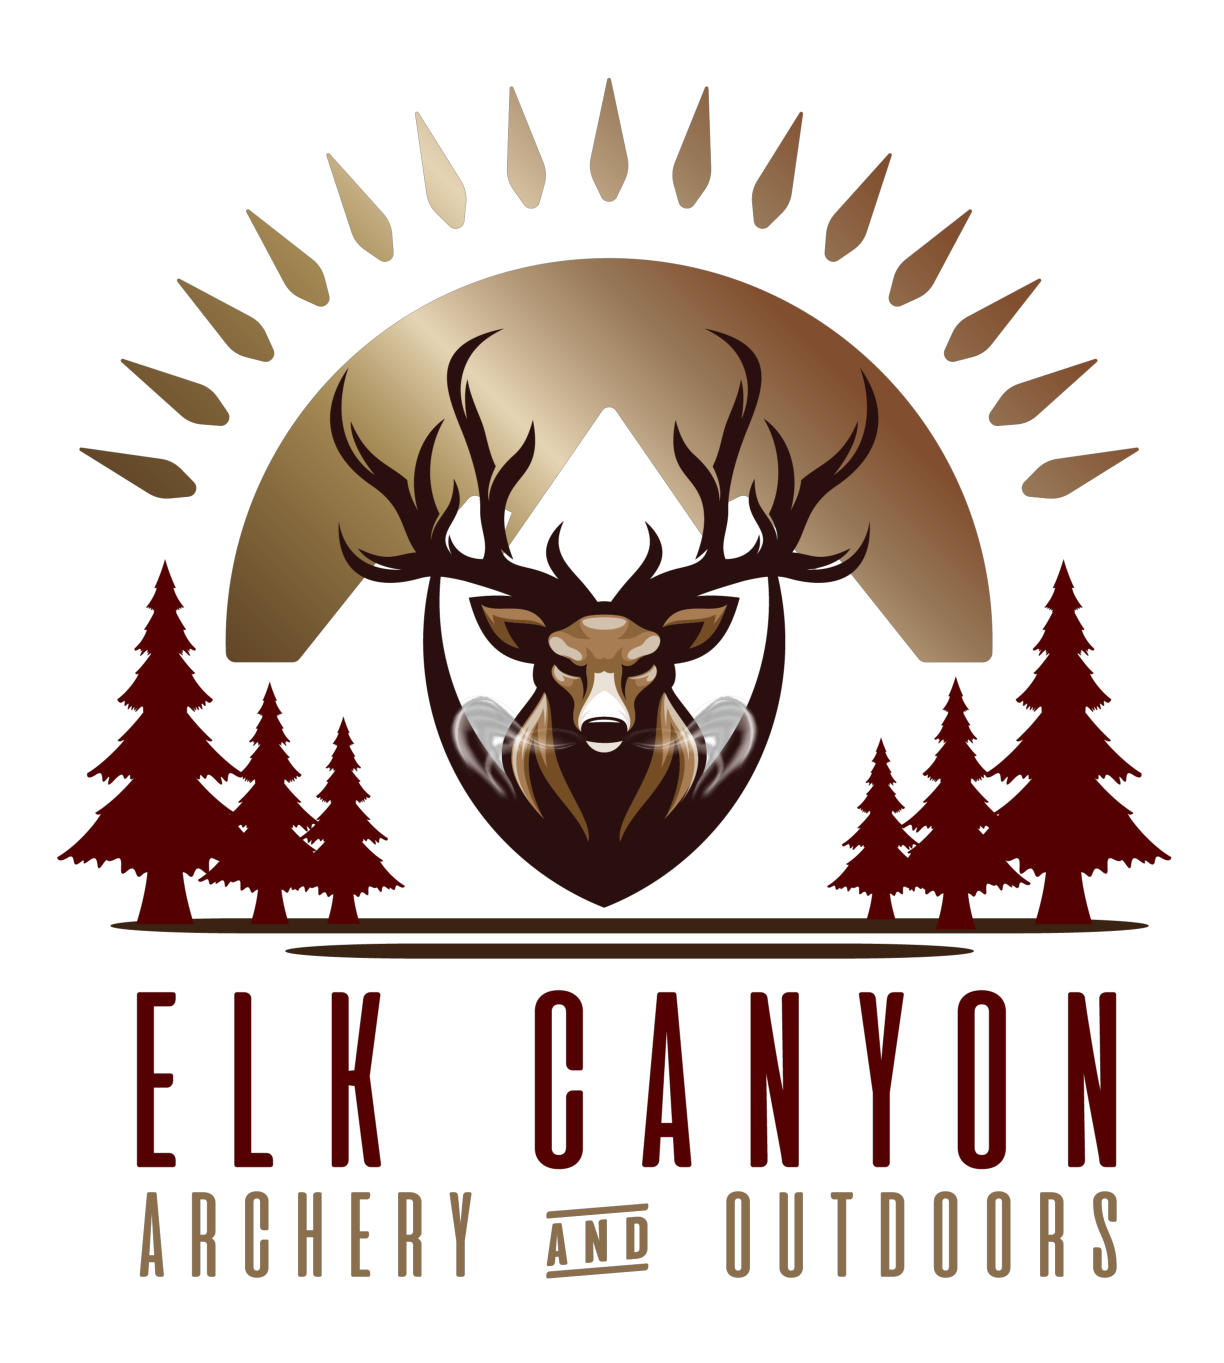 Elk Canyon Archery and Outdoors